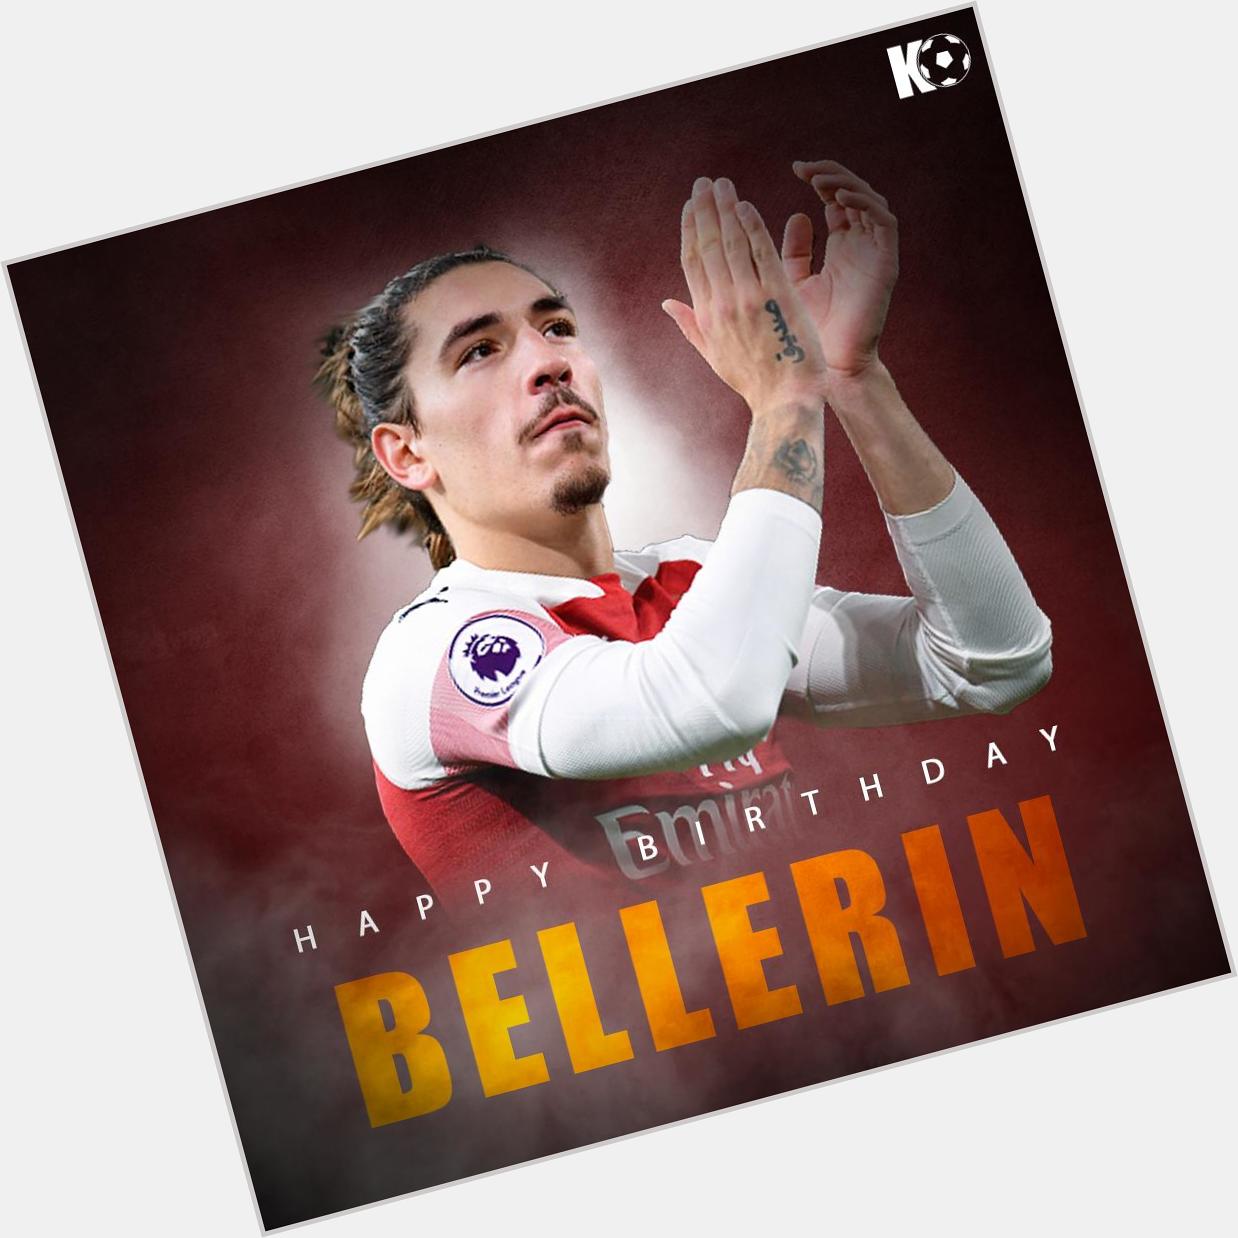 The Arsenal defender turns 24 today! Join in wishing Héctor Bellerín a Happy Birthday 